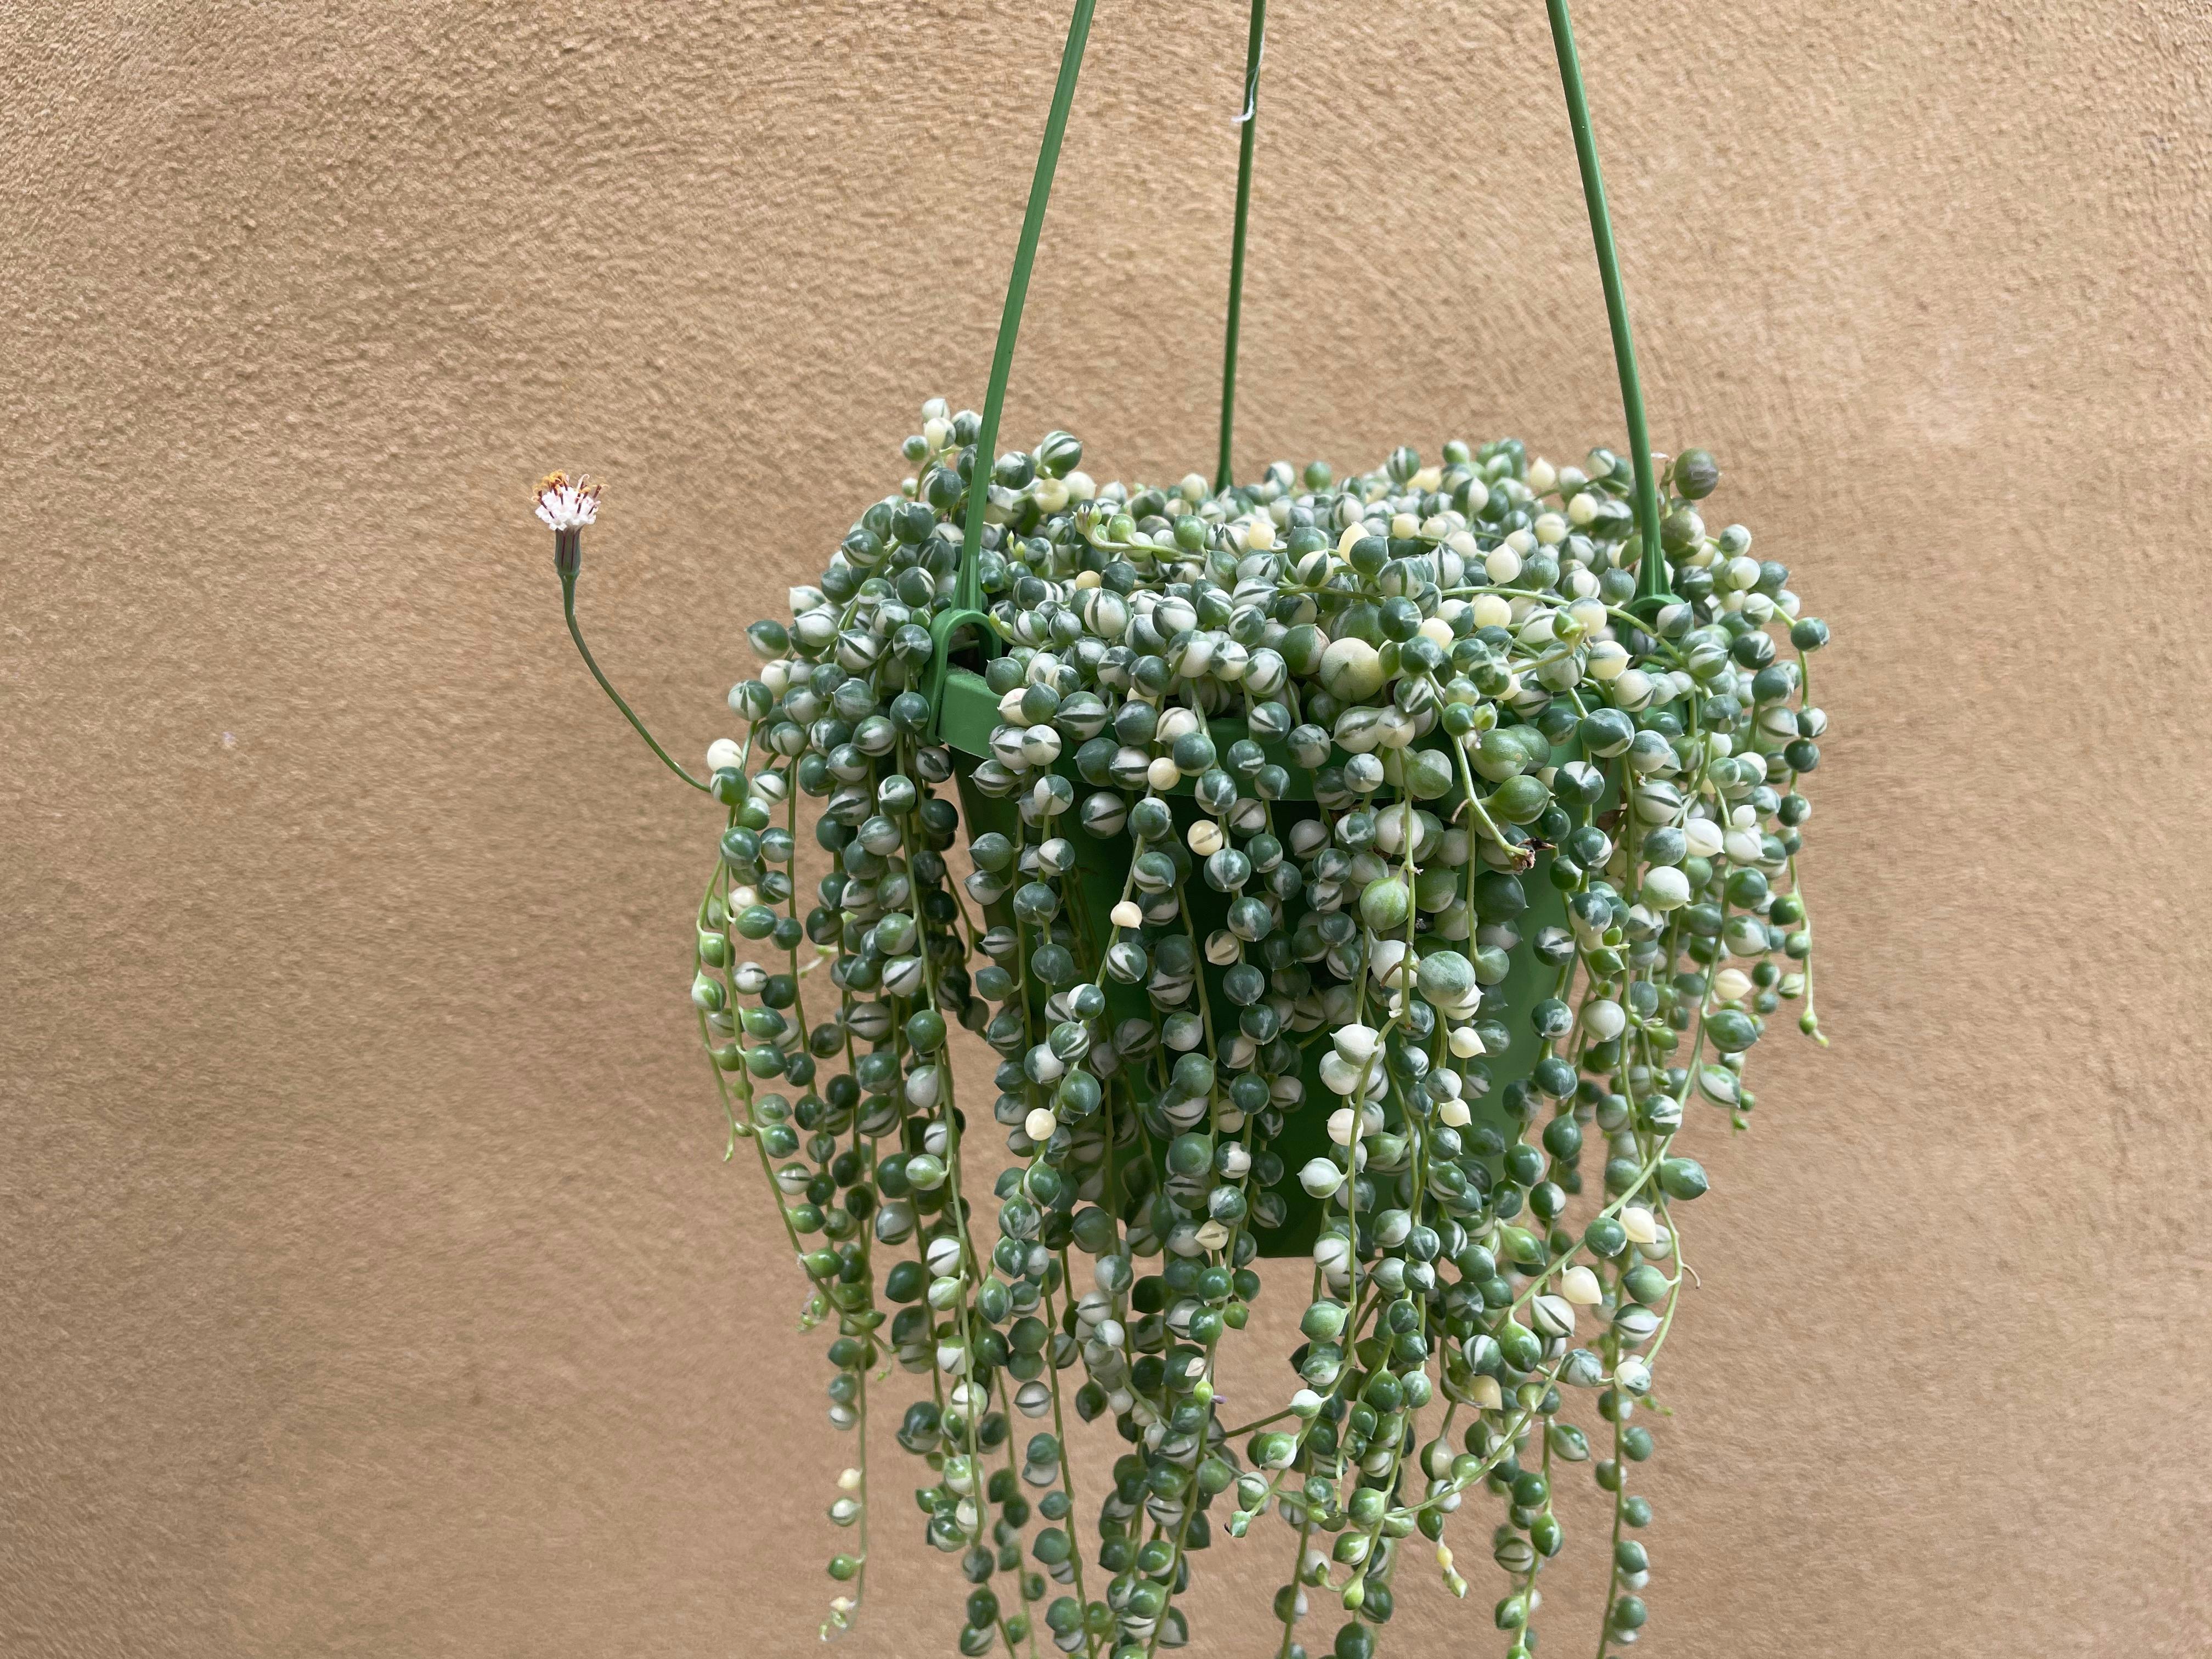 Variegated string of pearls in a hanging basket on a beige background.